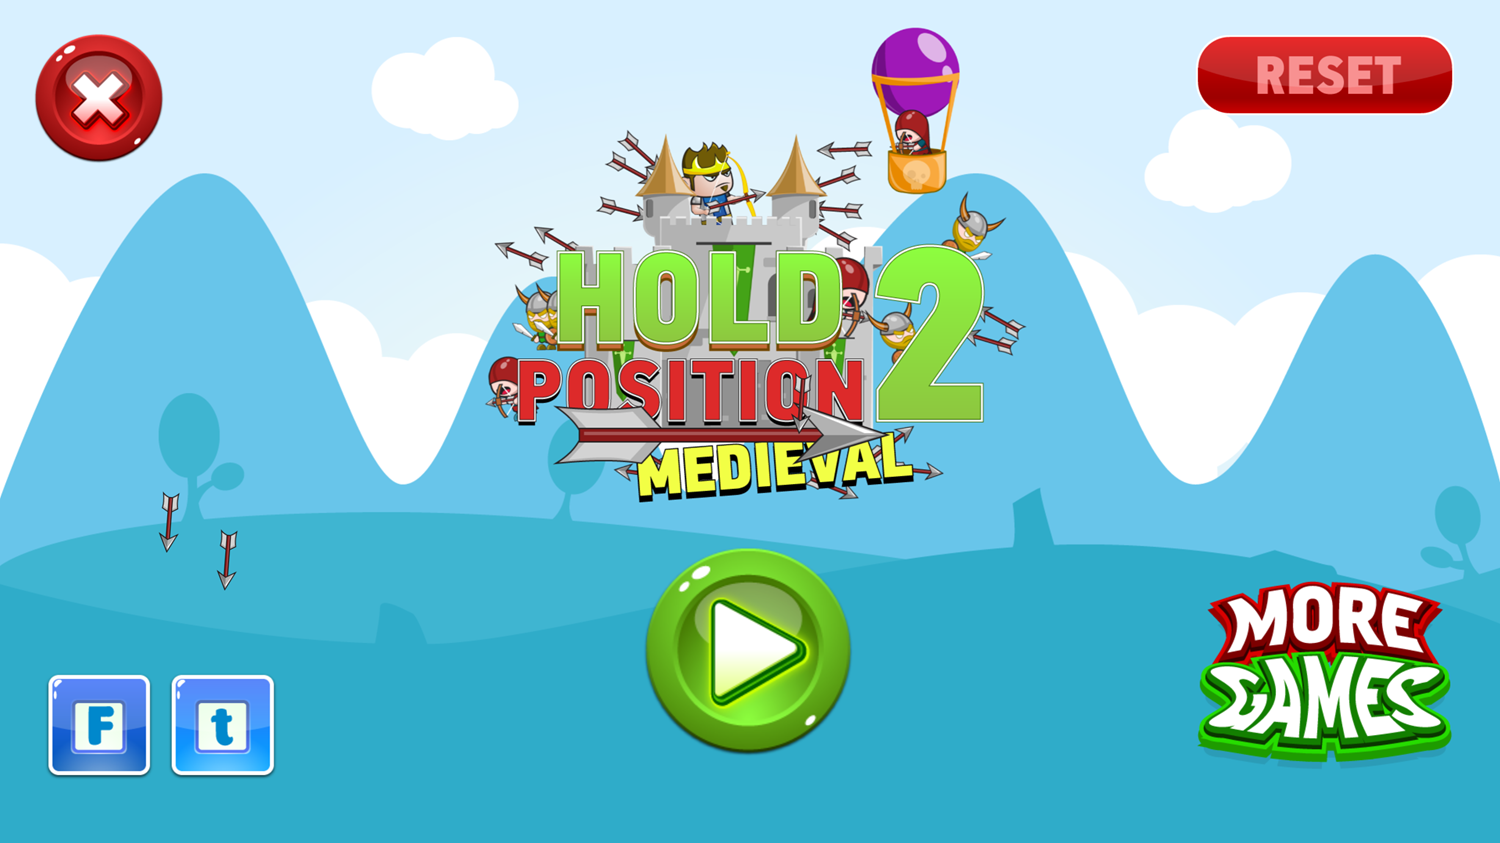 Hold Position 2 Game Welcome Screenshot.